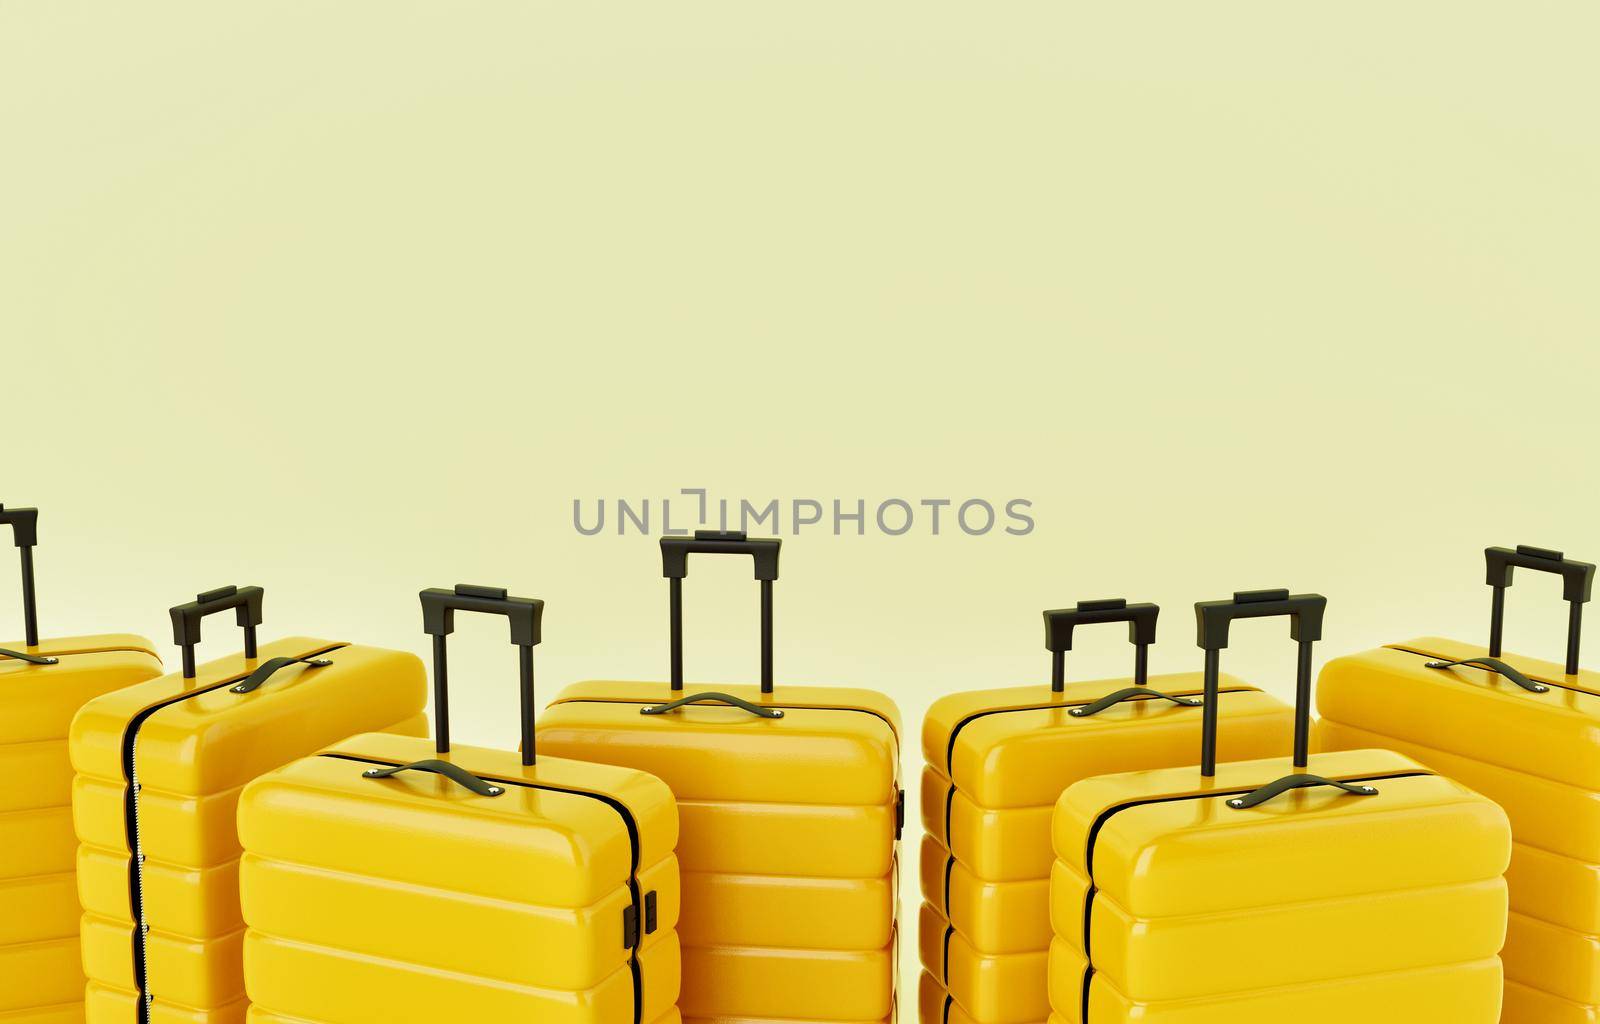 Group of yellow trolley suitcases on isolated background. Travel object and wanderlust concept. 3D illustration rendering